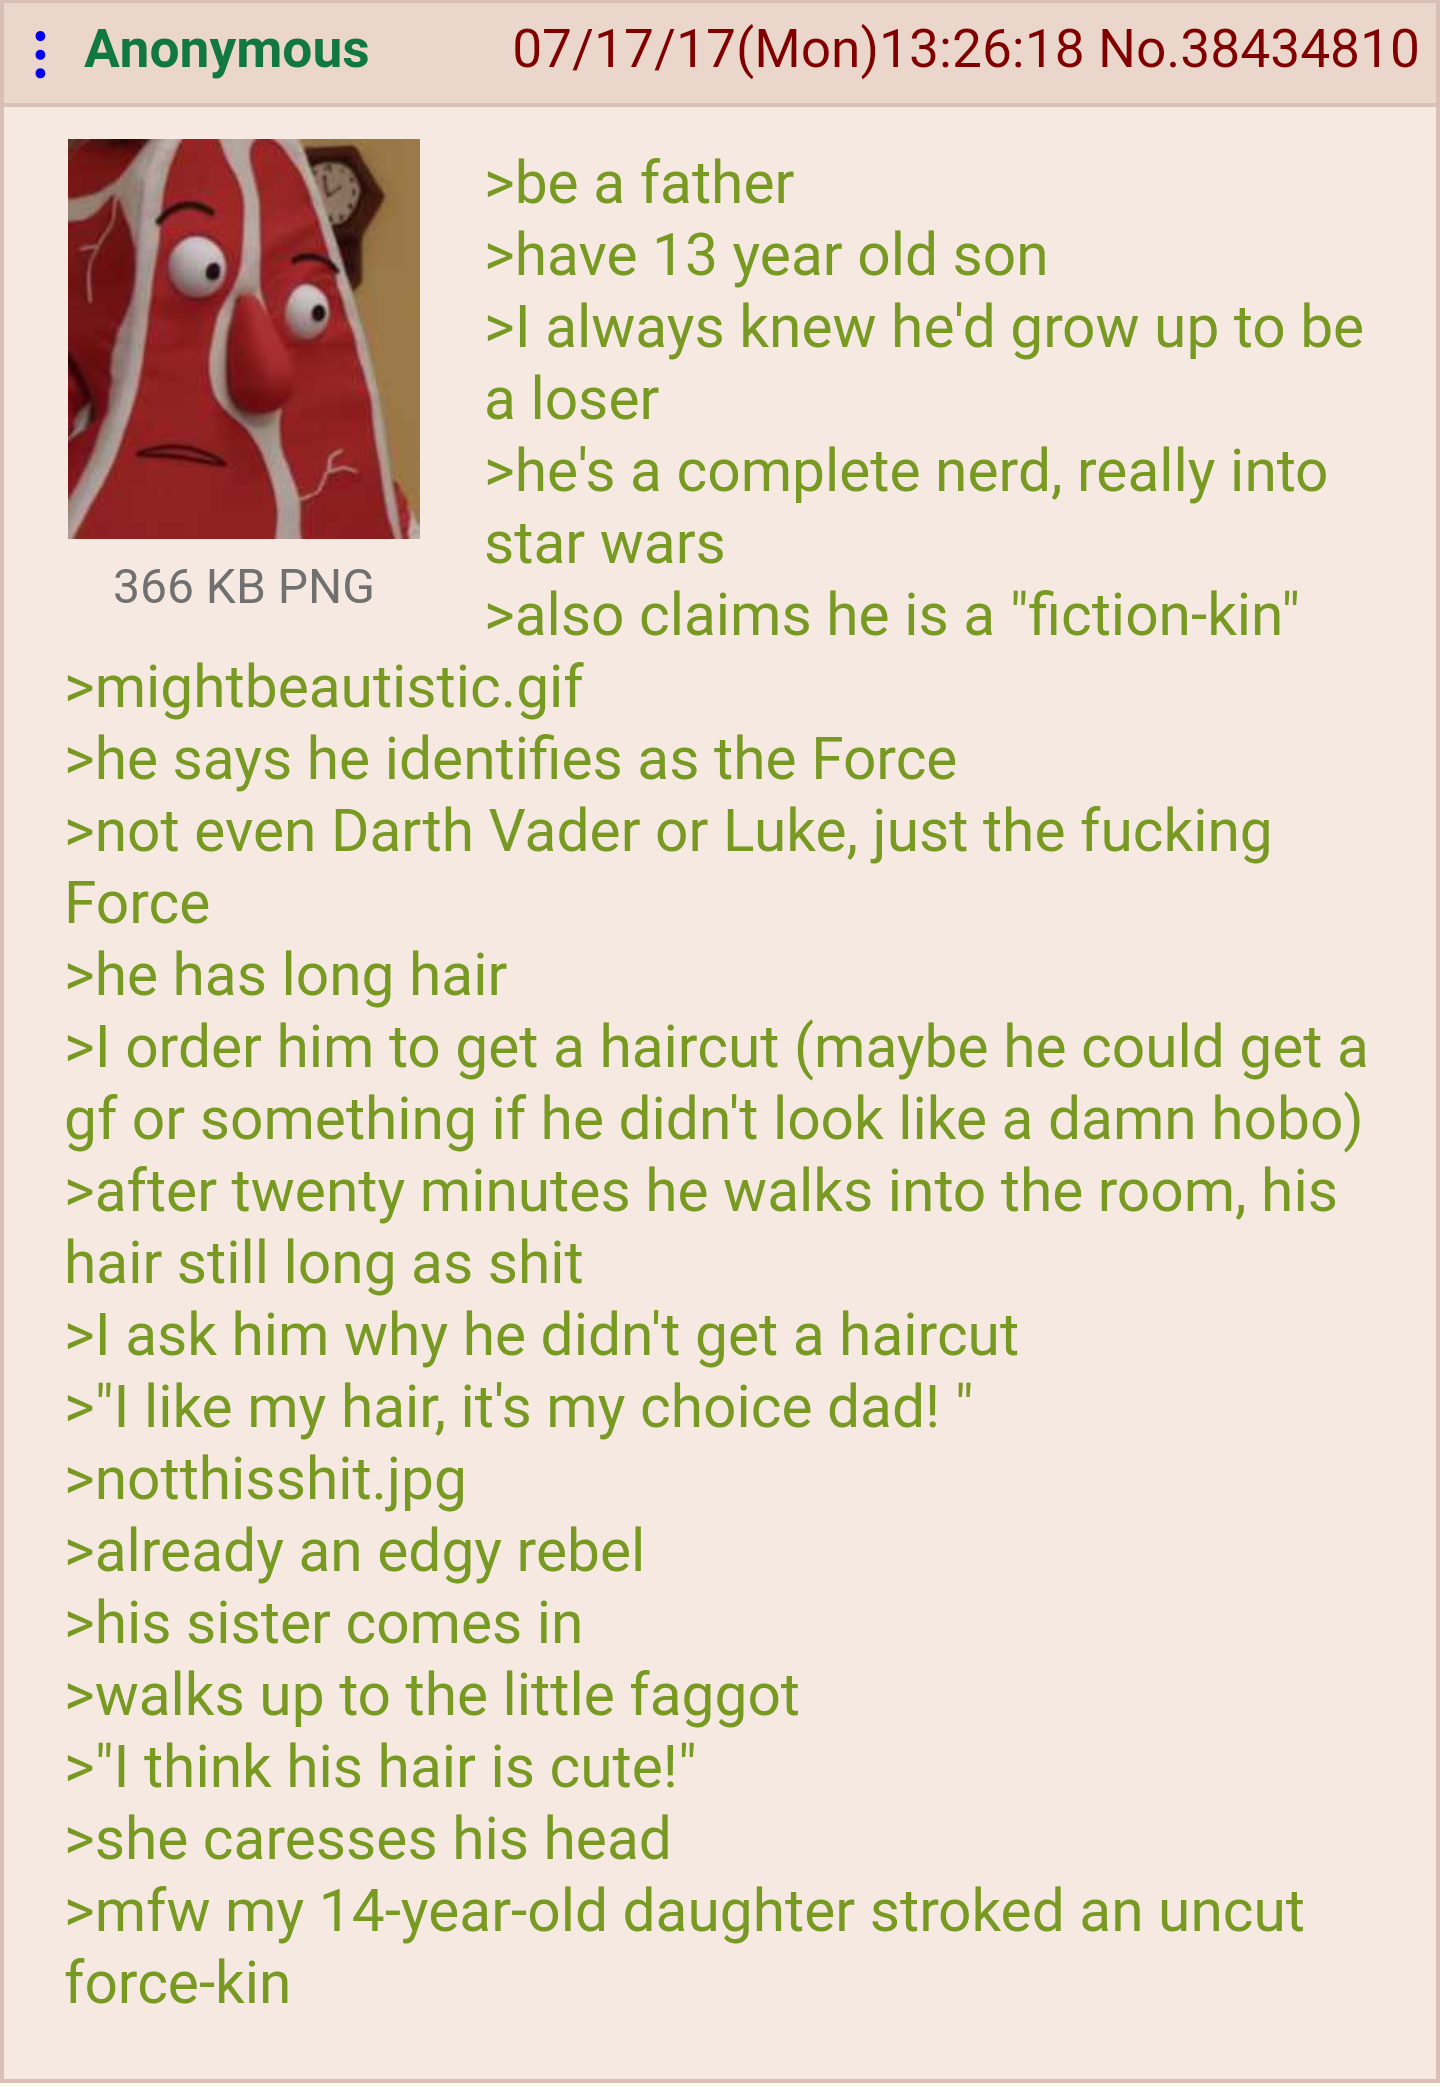 Robot is disappointed in his son.